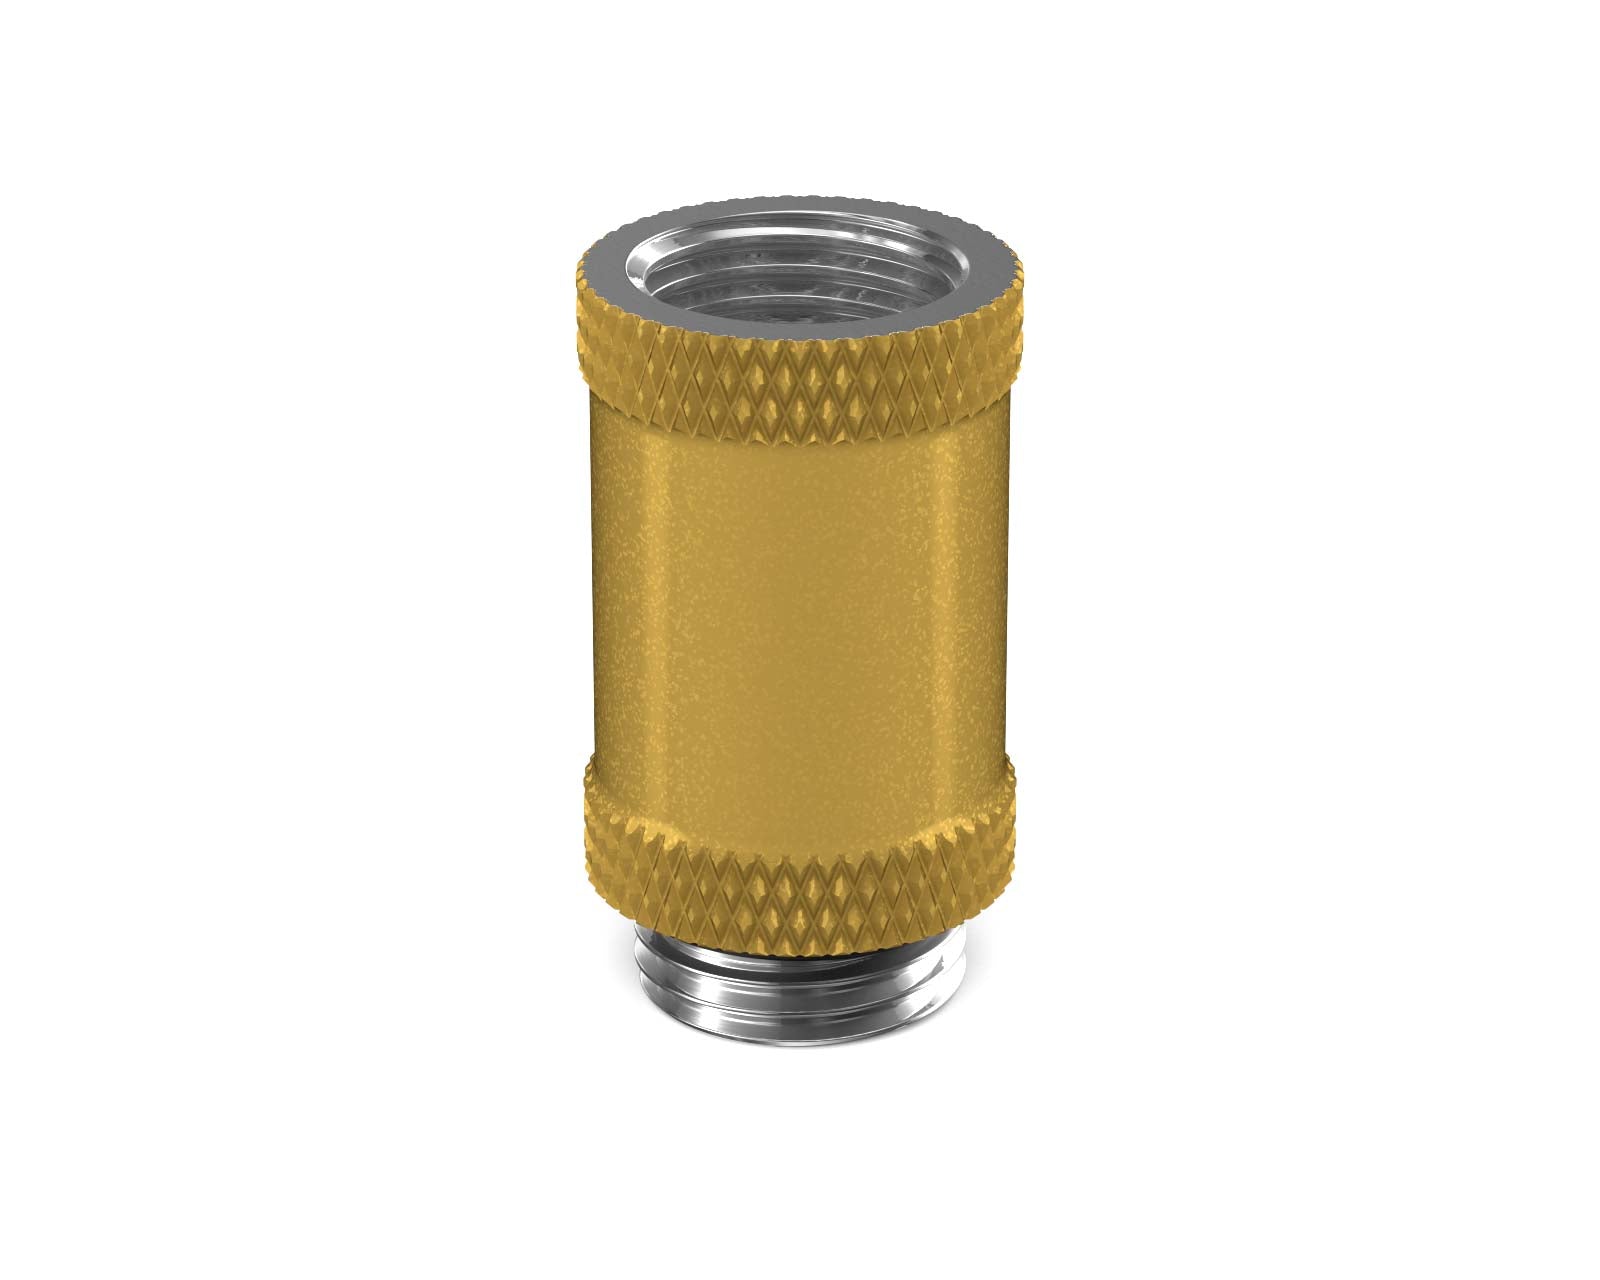 PrimoChill Male to Female G 1/4in. 25mm SX Extension Coupler - PrimoChill - KEEPING IT COOL Gold